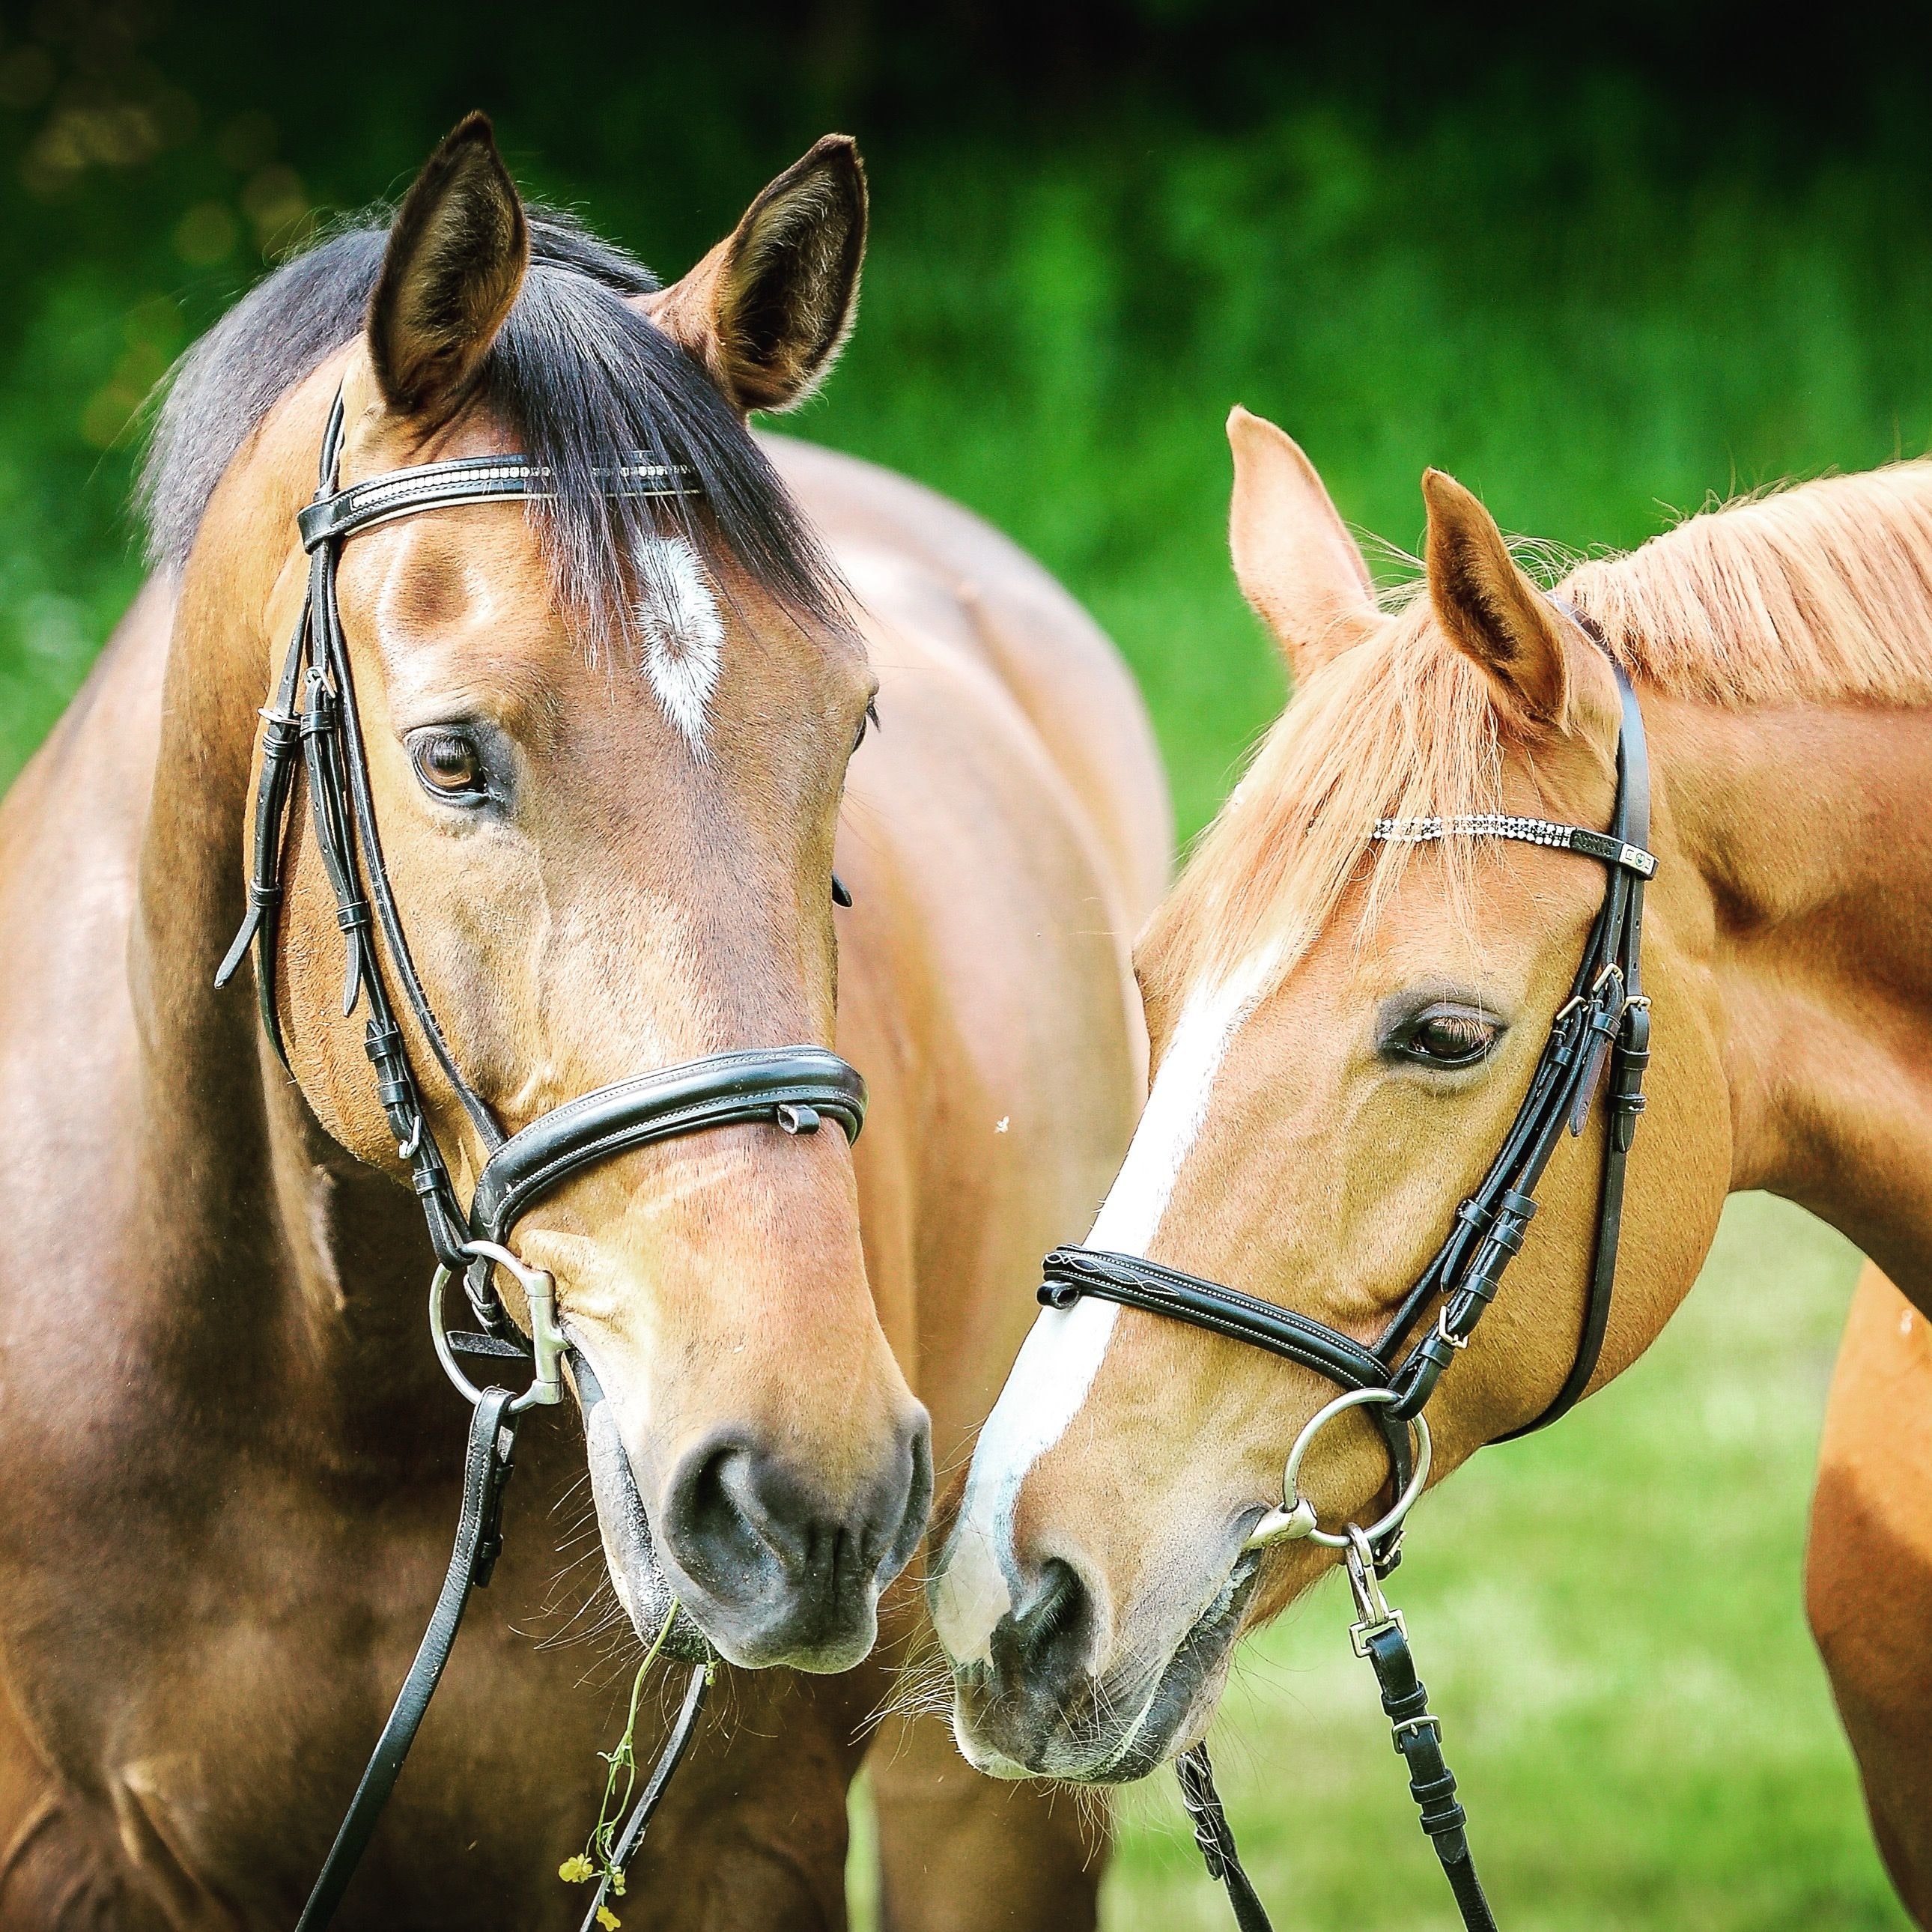 The Therapeutic Benefits of Equine Therapy: An Interview with Deborah Williams